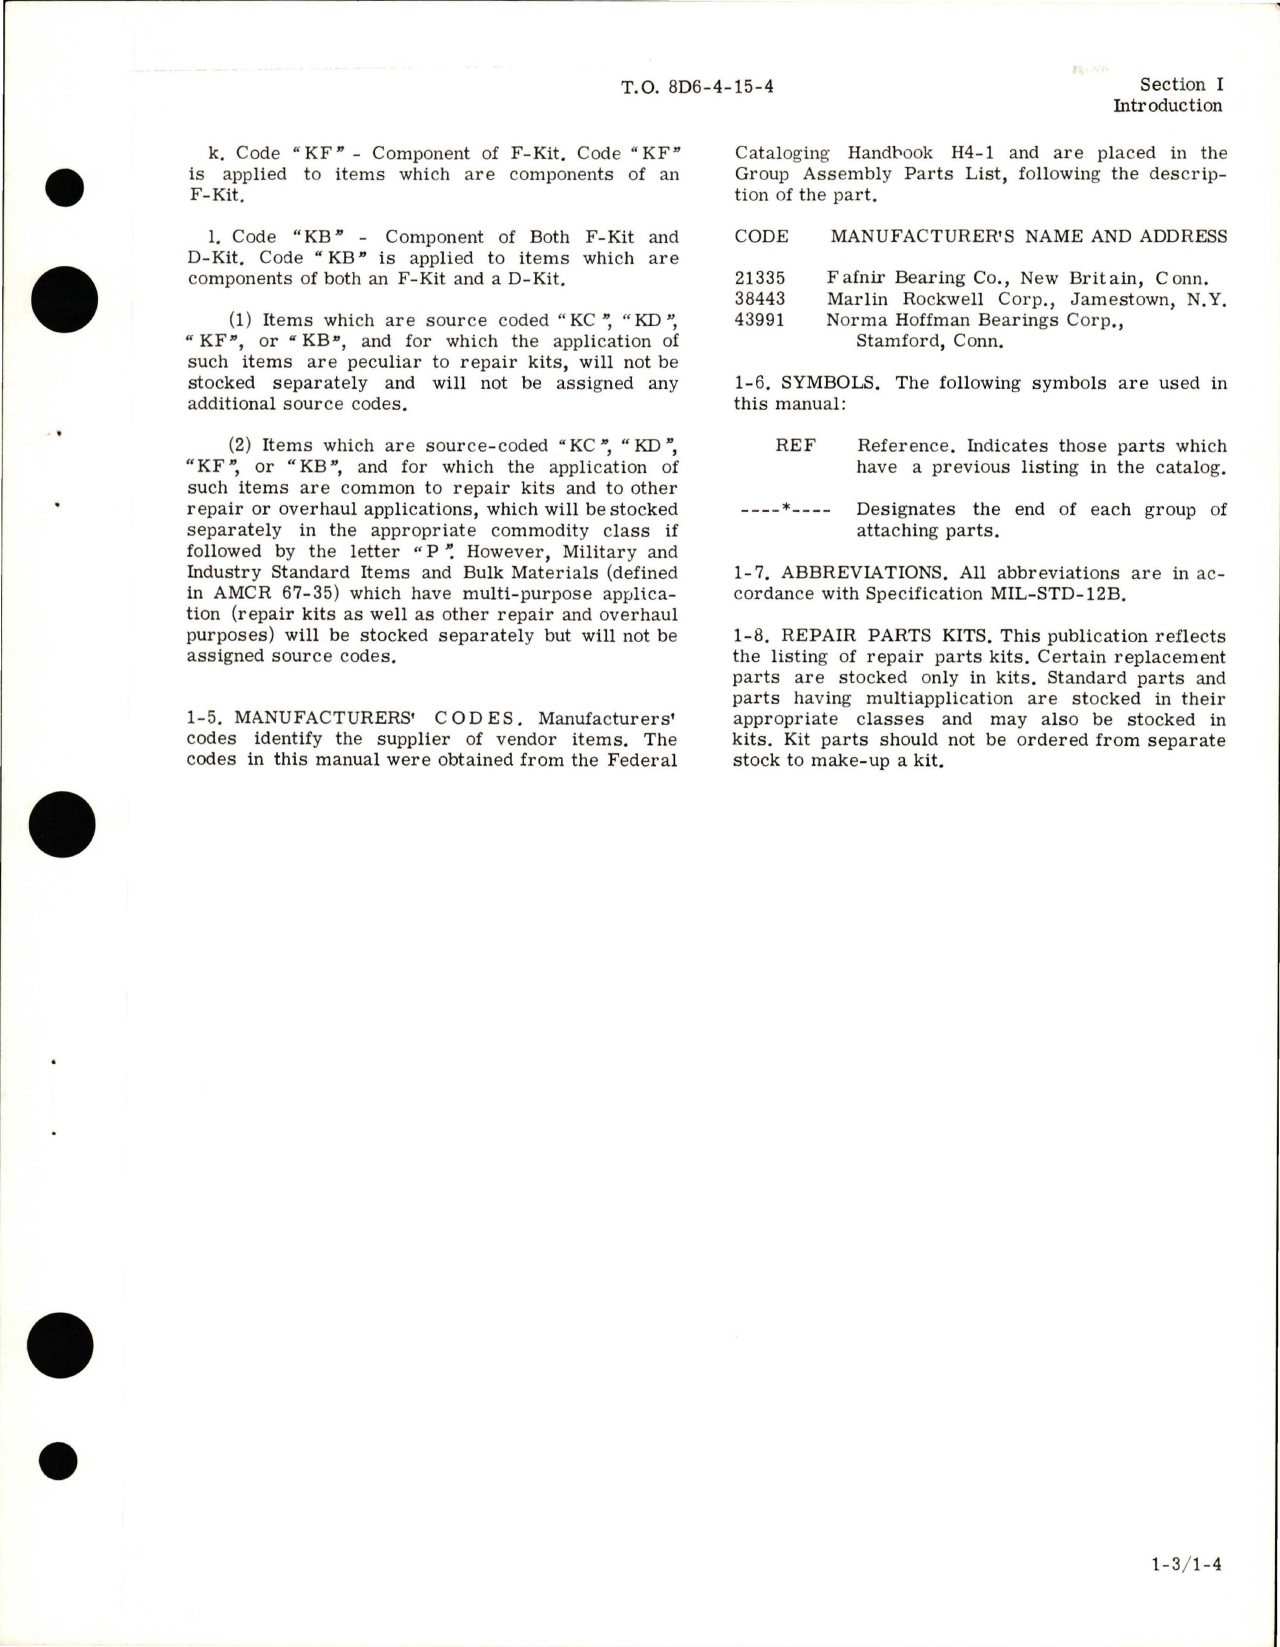 Sample page 5 from AirCorps Library document: Illustrated Parts Breakdown for Starter-Generator - Type STU-6 A - Model 23031-004